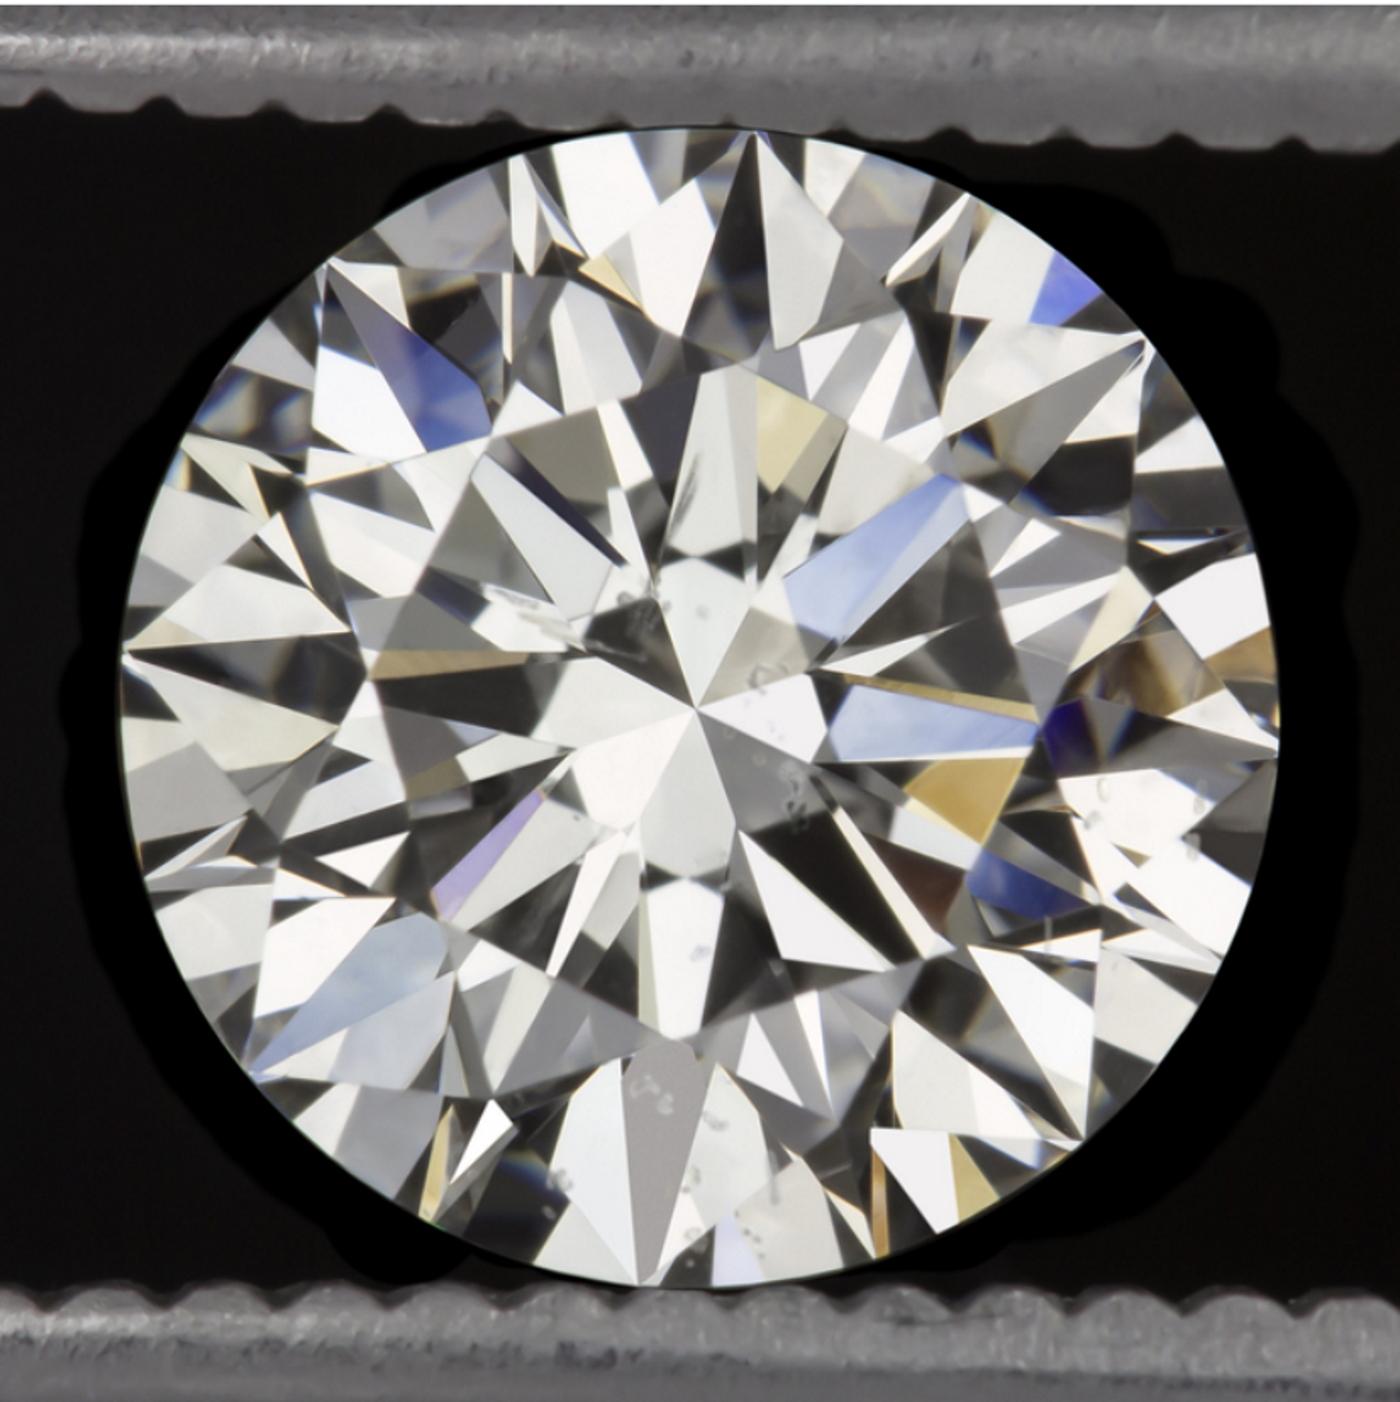 Amazing 2 carat GIA certified triple excellent diamond is beautifully white, 100% eye clean, and displays absolutely phenomenal sparkle! This diamond was hand selected because it is completely eye clean, proper J color without any undertones or